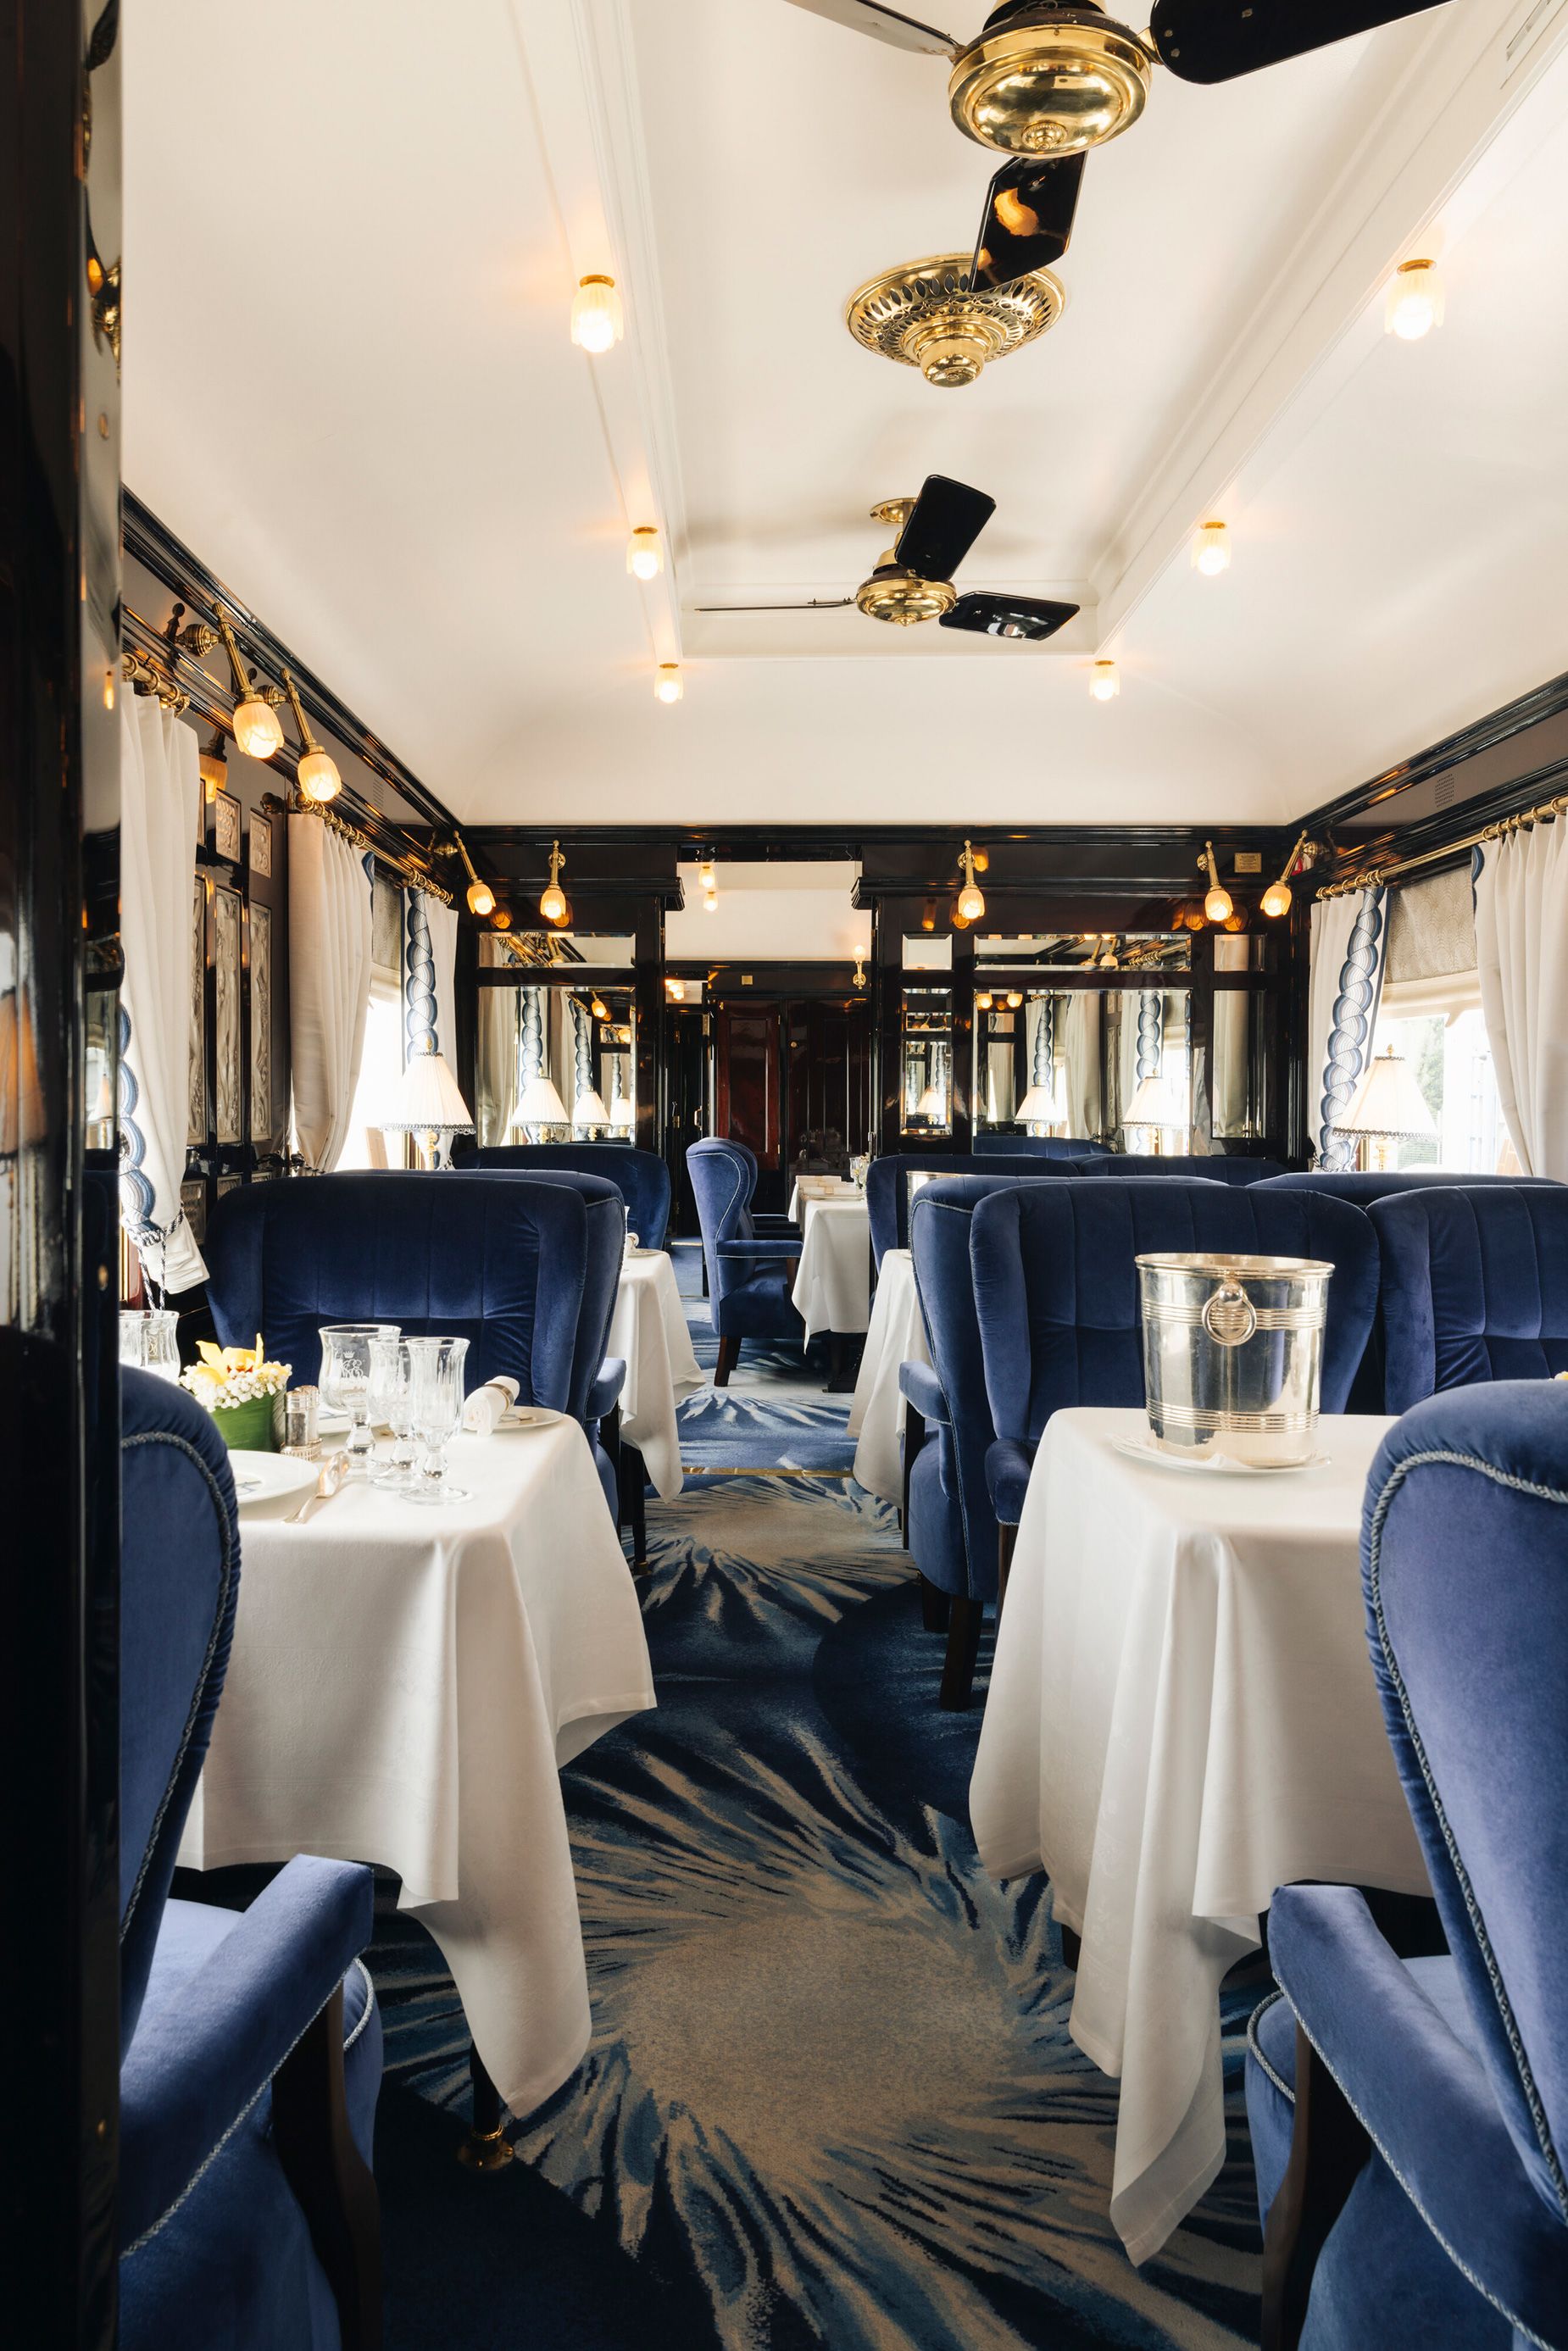 The train journey will feature fine dining from a Michelin-starred chef.